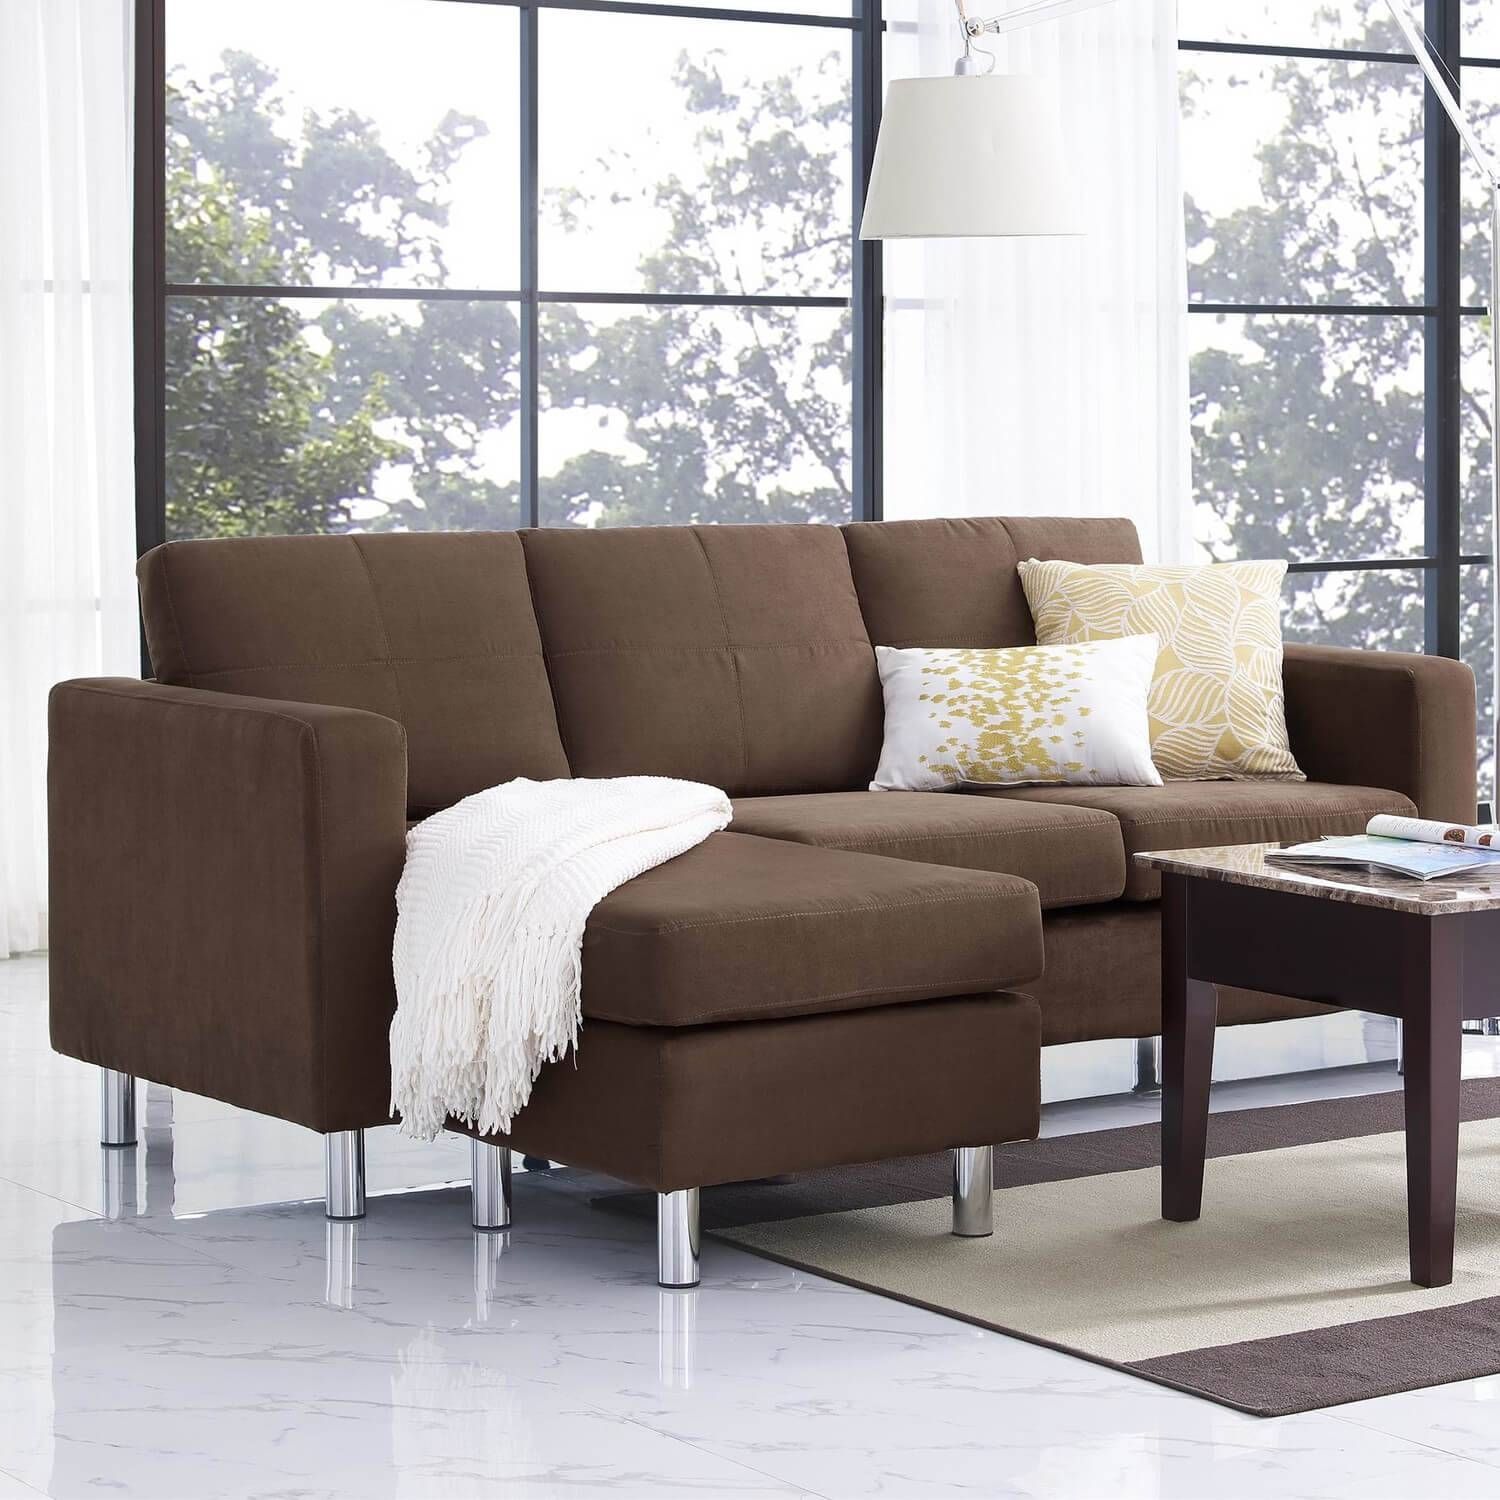 Furniture & Sofa: Perfect Small Spaces Configurable Sectional Sofa With Regard To Sectional Sofas In Small Spaces (Photo 10 of 25)